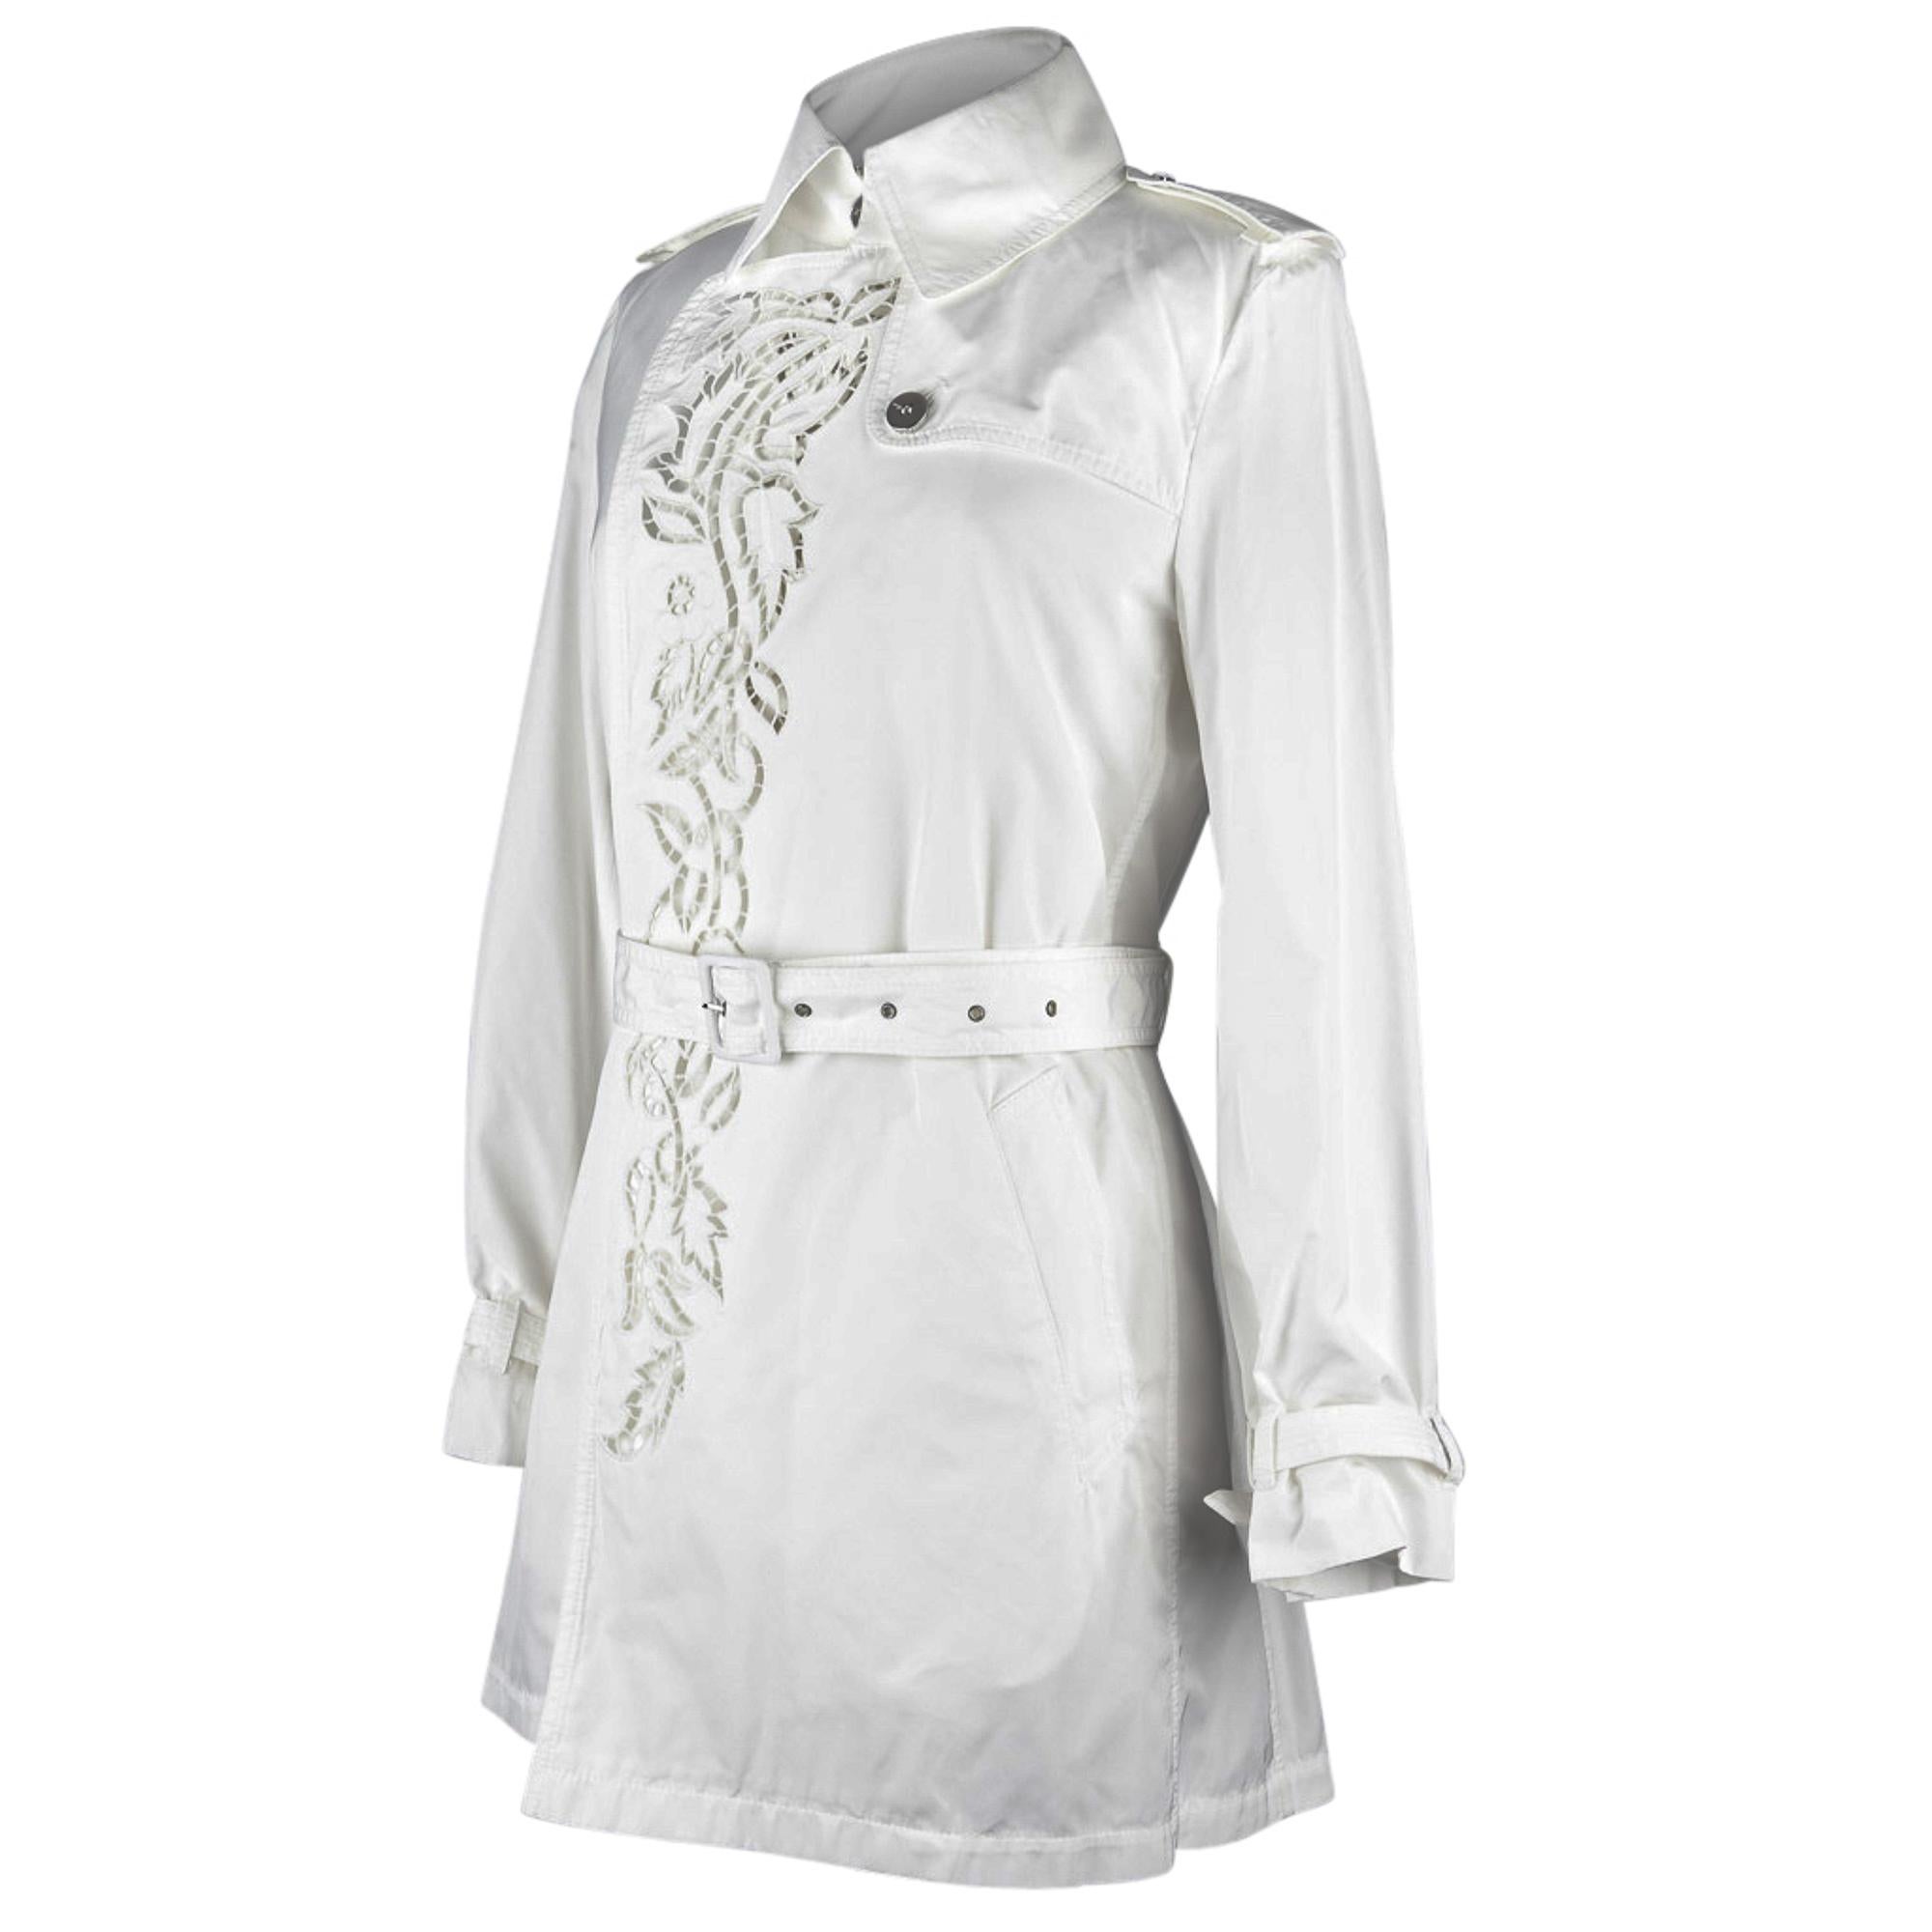 Roberto Cavalli Coat Trench Laser Cut Detail Winter White 42 / 8 New w/ Tag 2